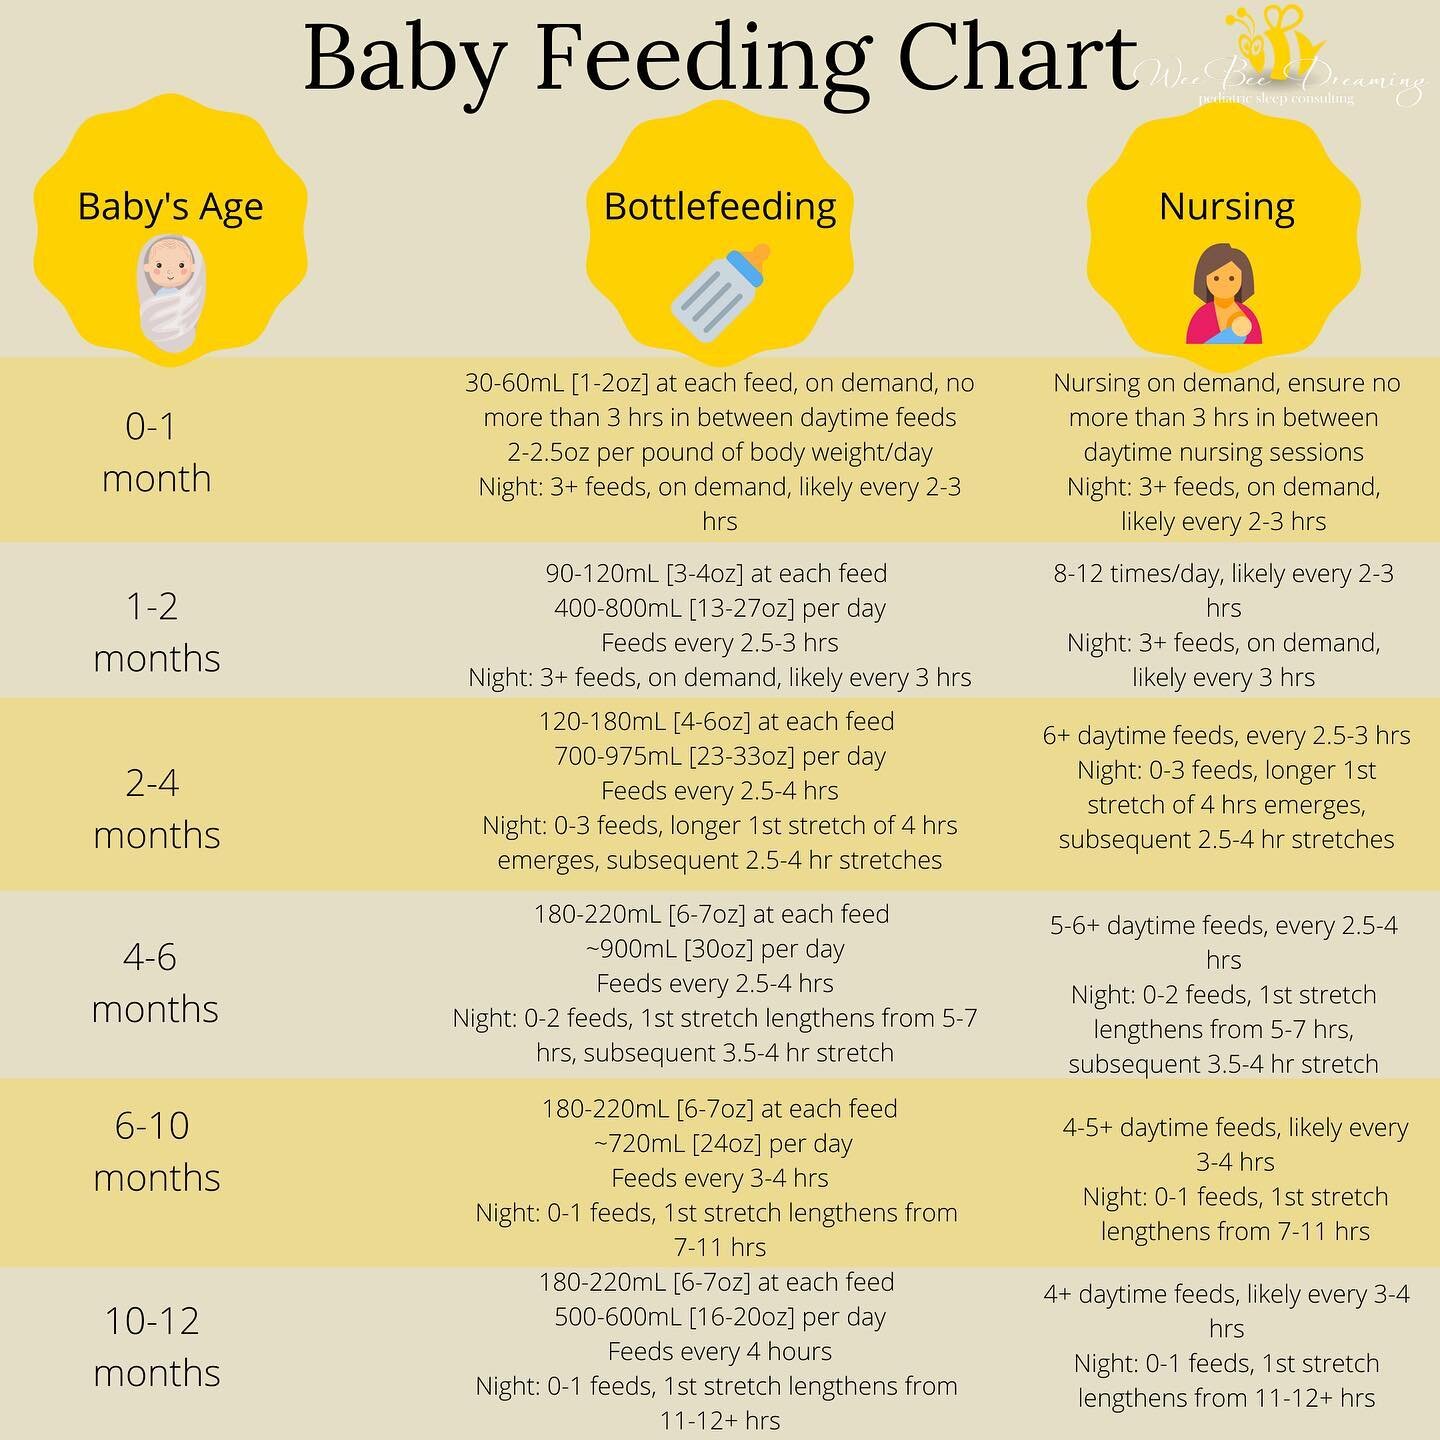 🍼Baby Feeding Chart!⁣ 🤱🏼 
⁣
I asked my SIL what a helpful chart would have been as a first-time parent, and she gave me this recommendation since the amount/frequency of feeds was something she felt unsure about!⁣
⁣
➰Now of course, this is just a 